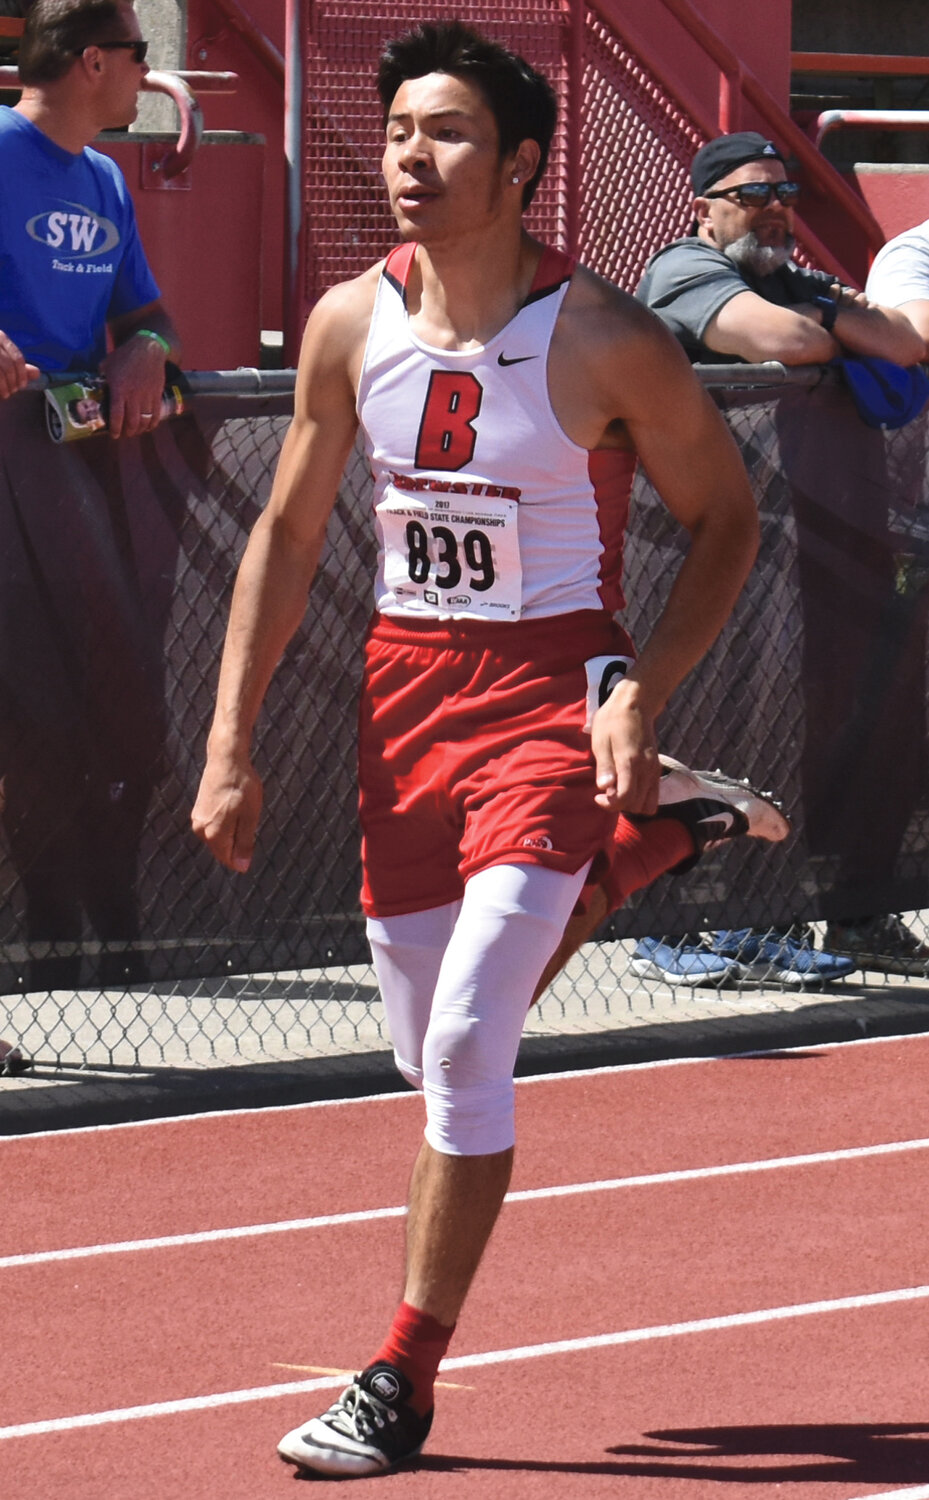 Ernie Nanamkin placed 8th in the Boys 400m run and also finished in 12th place in the javelin event with his farther throw going 163’2’’.